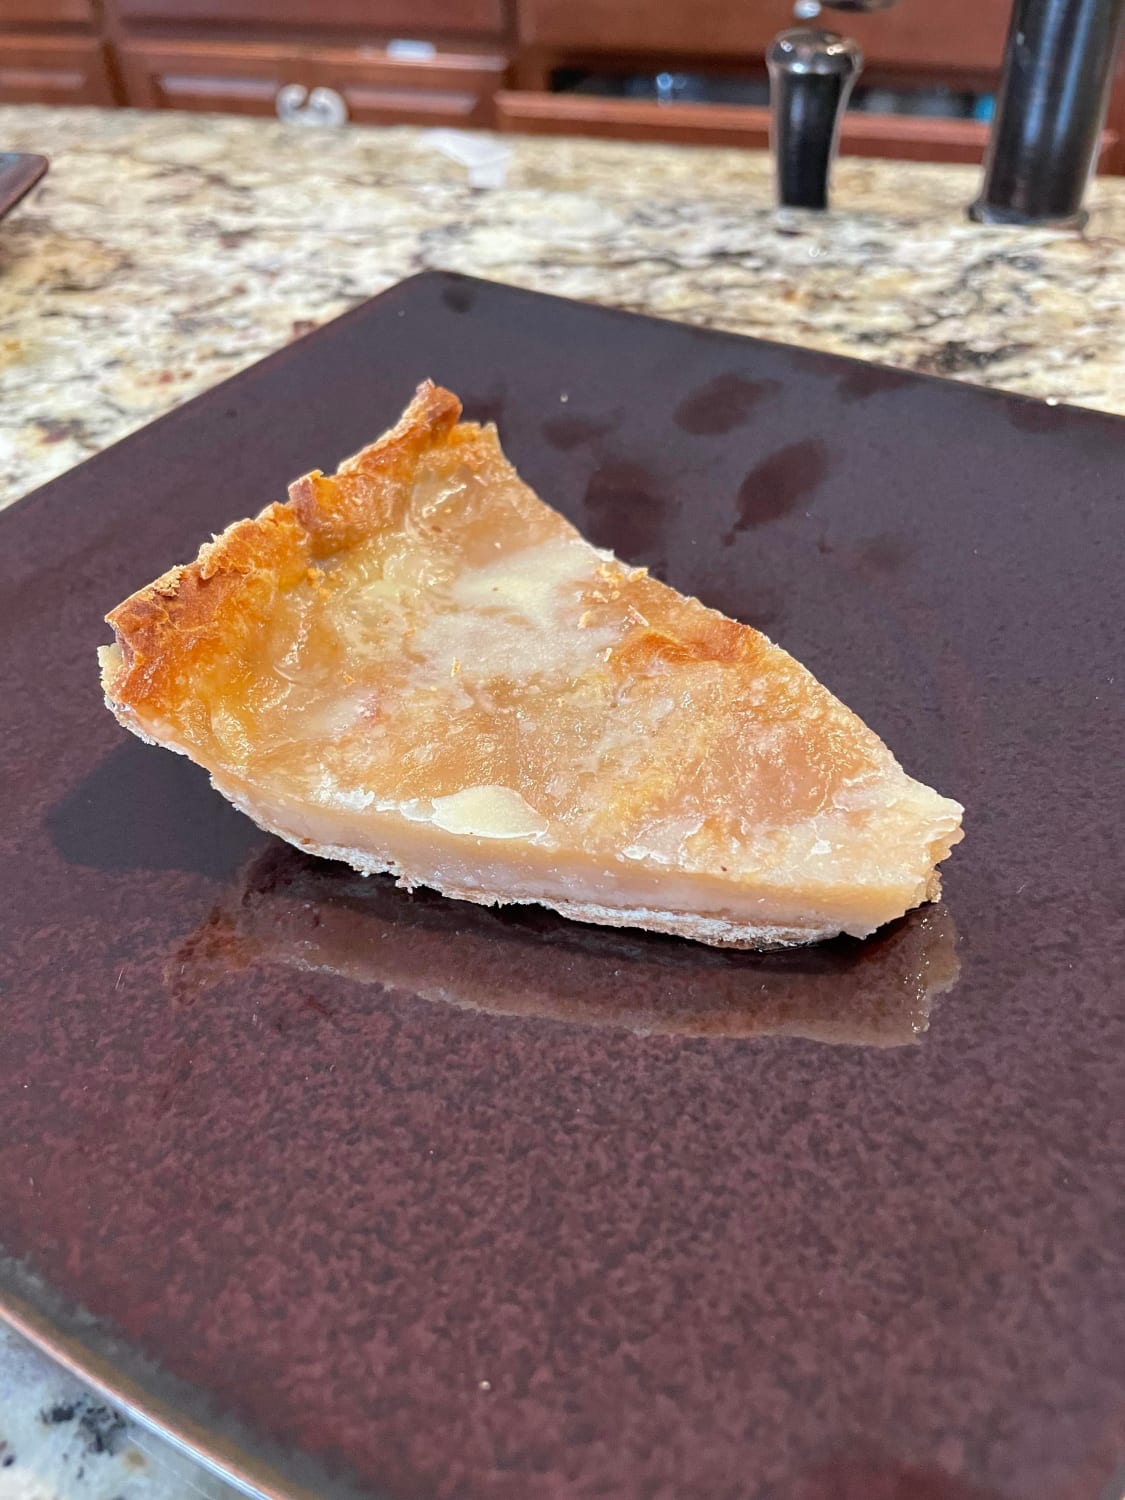 After a recent visit to the supermarket proved that I’m being priced out of my favorite pastime, I looked into what people baked during the Great Depression. Behold…water pie! (It’s actually really good!)